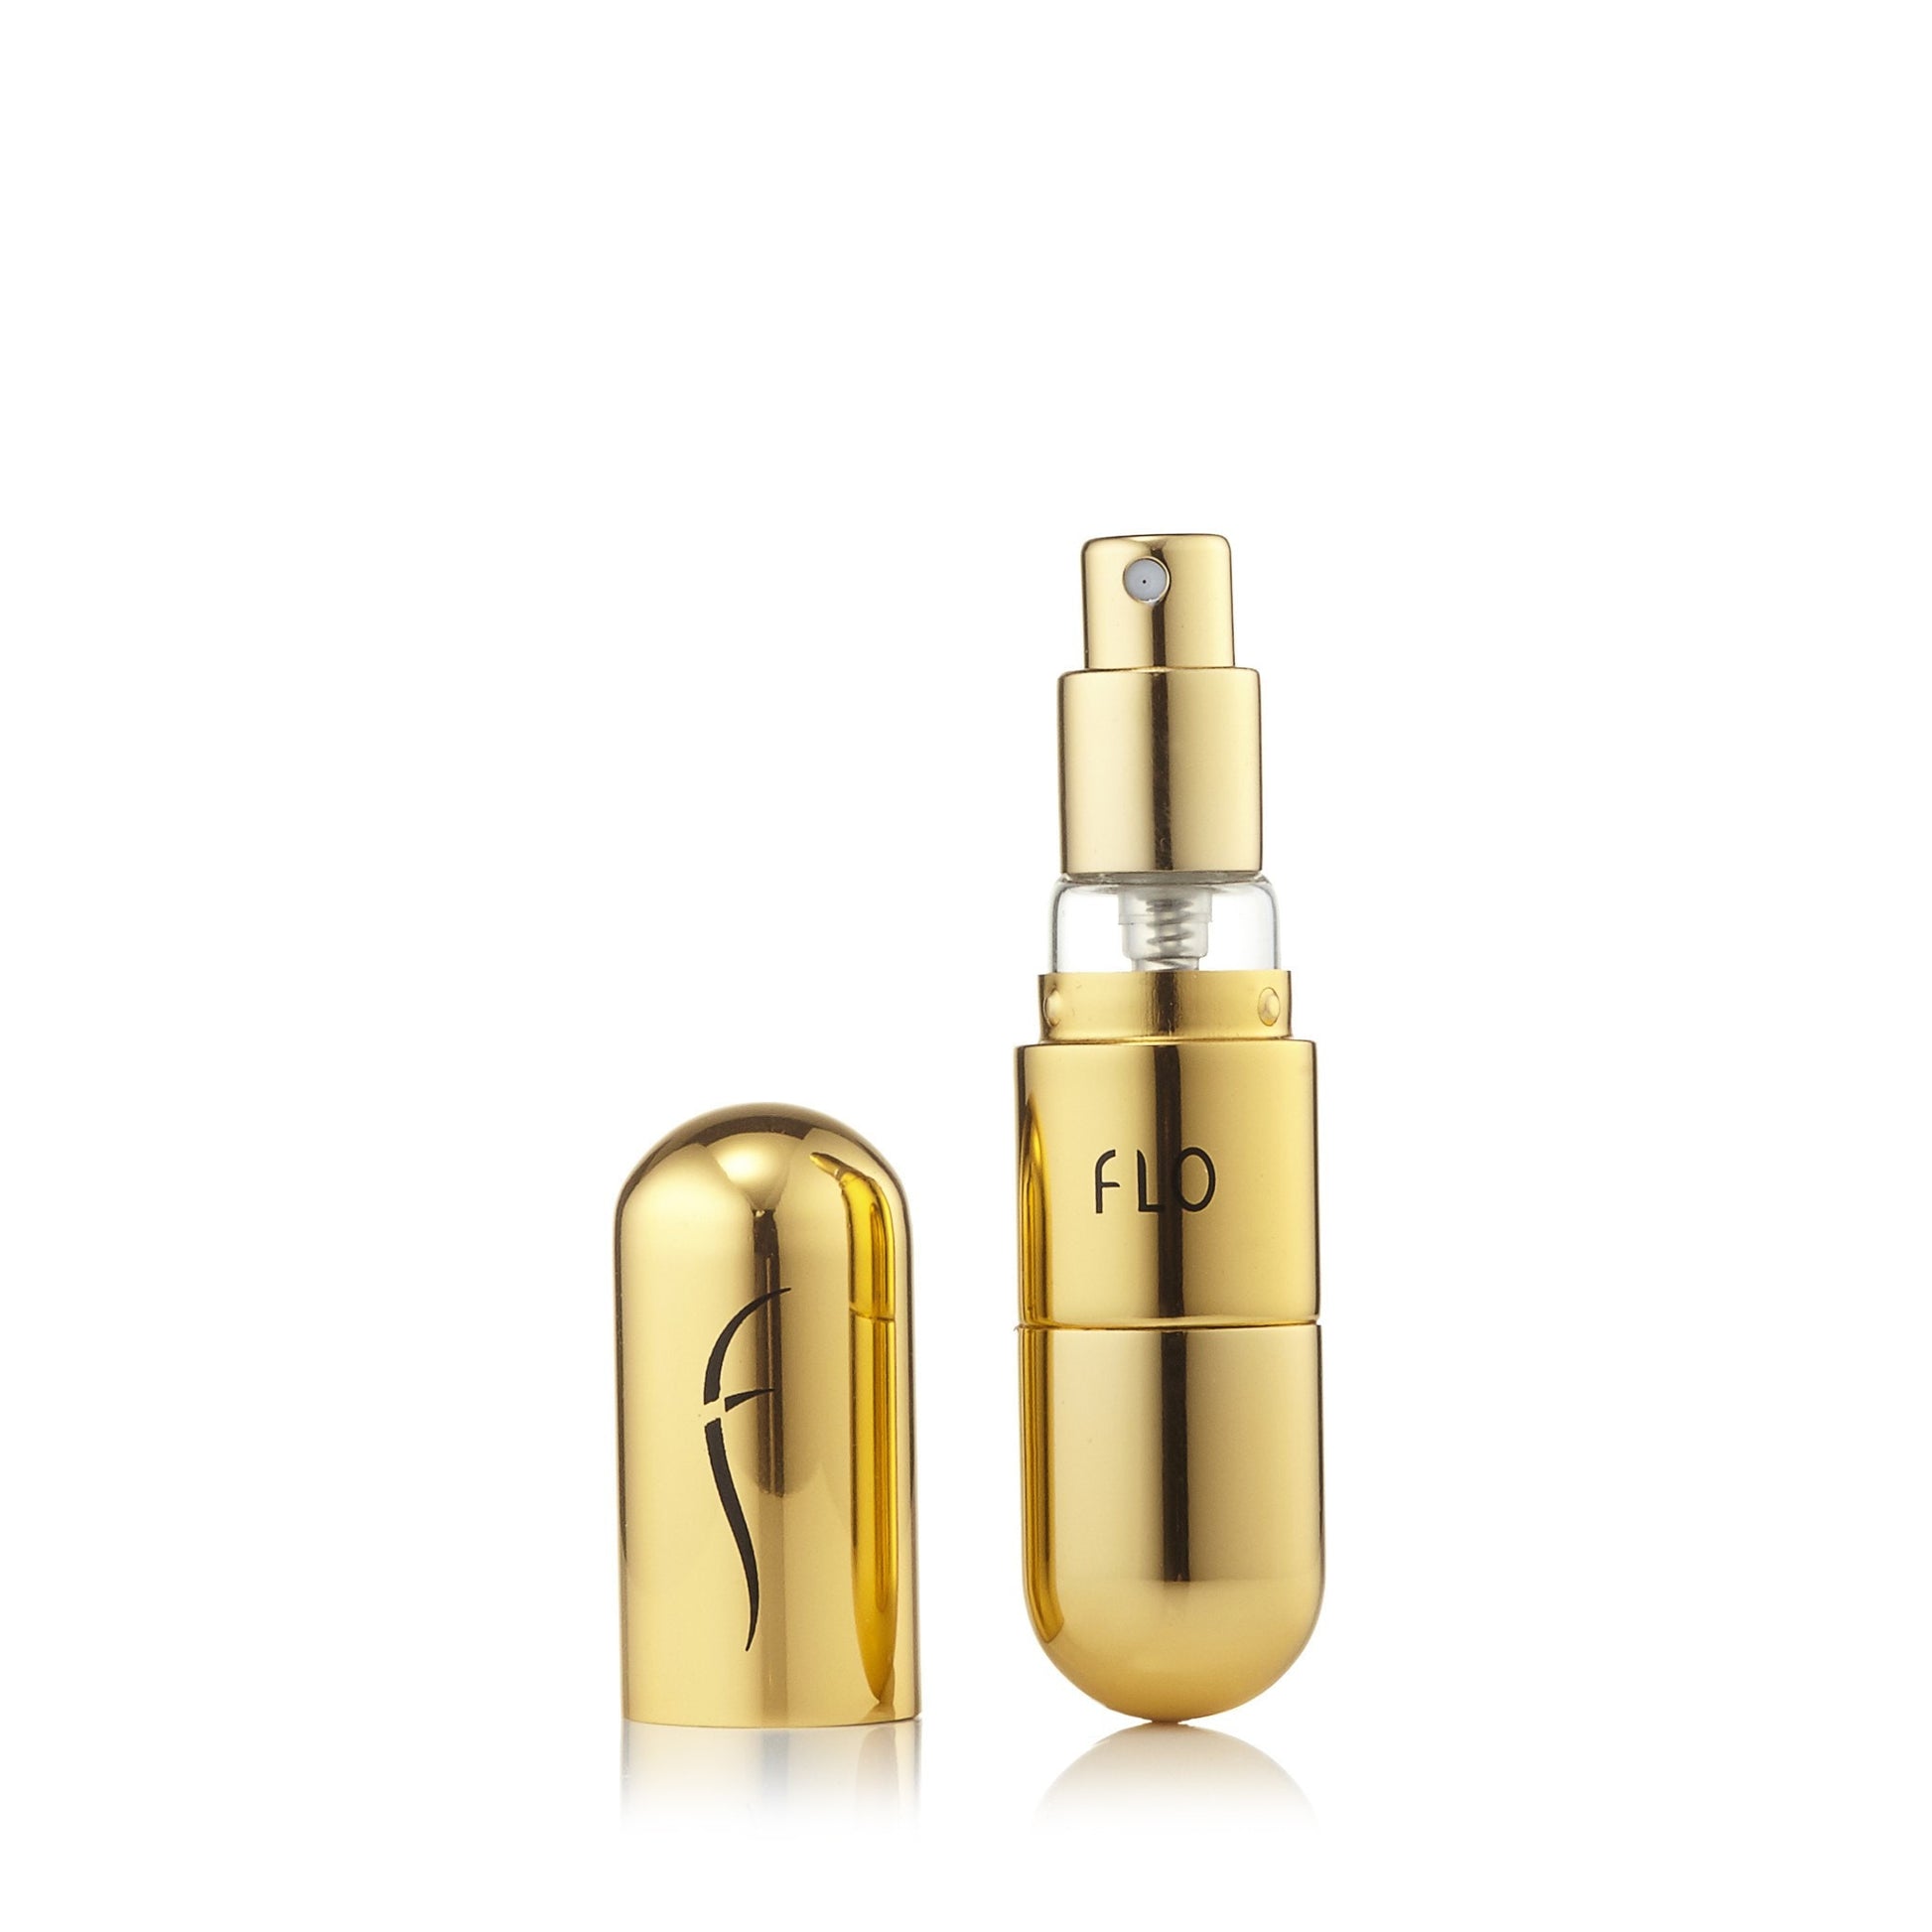 Refillable Perfume Atomizer by Flo Gold Click to open in modal